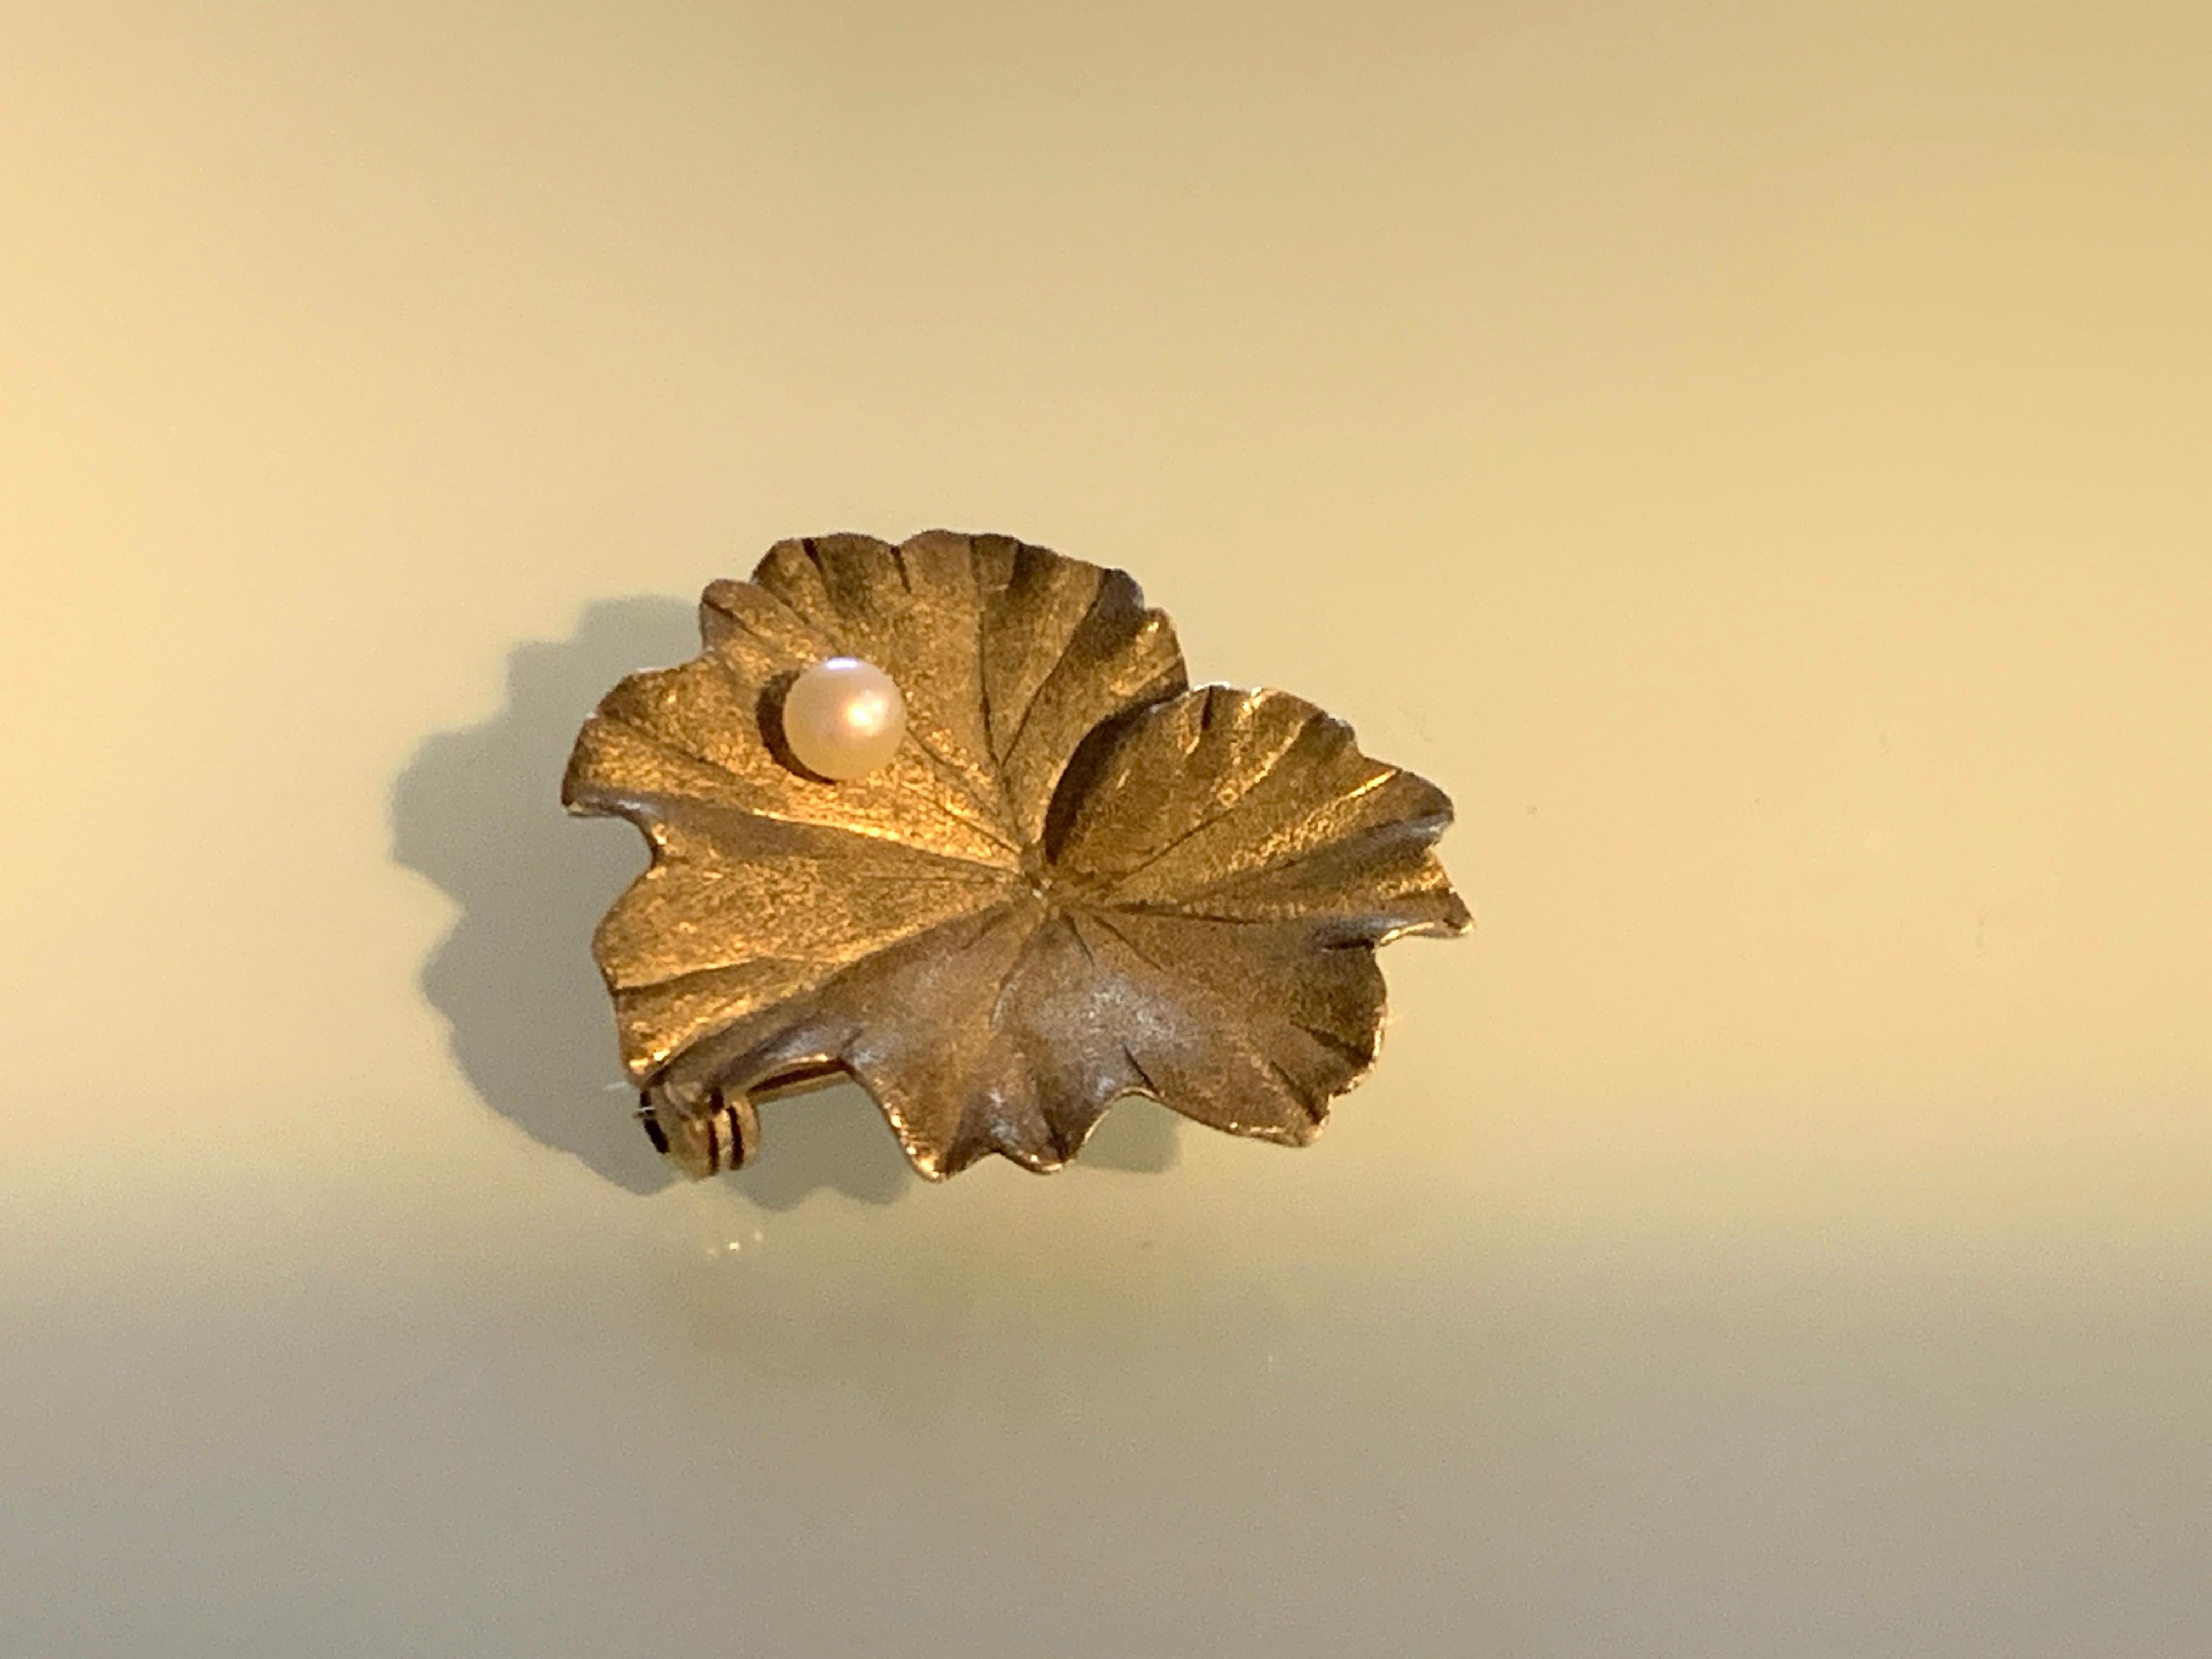 Beautiful rare Waterlily
9ct Gold brooch
with a cultured pearl balanced on its surface
Has a beautiful sand blasted surface which has a darker appeal -
fully hallmarked on reverse
London import mark 9 375 and date letter 